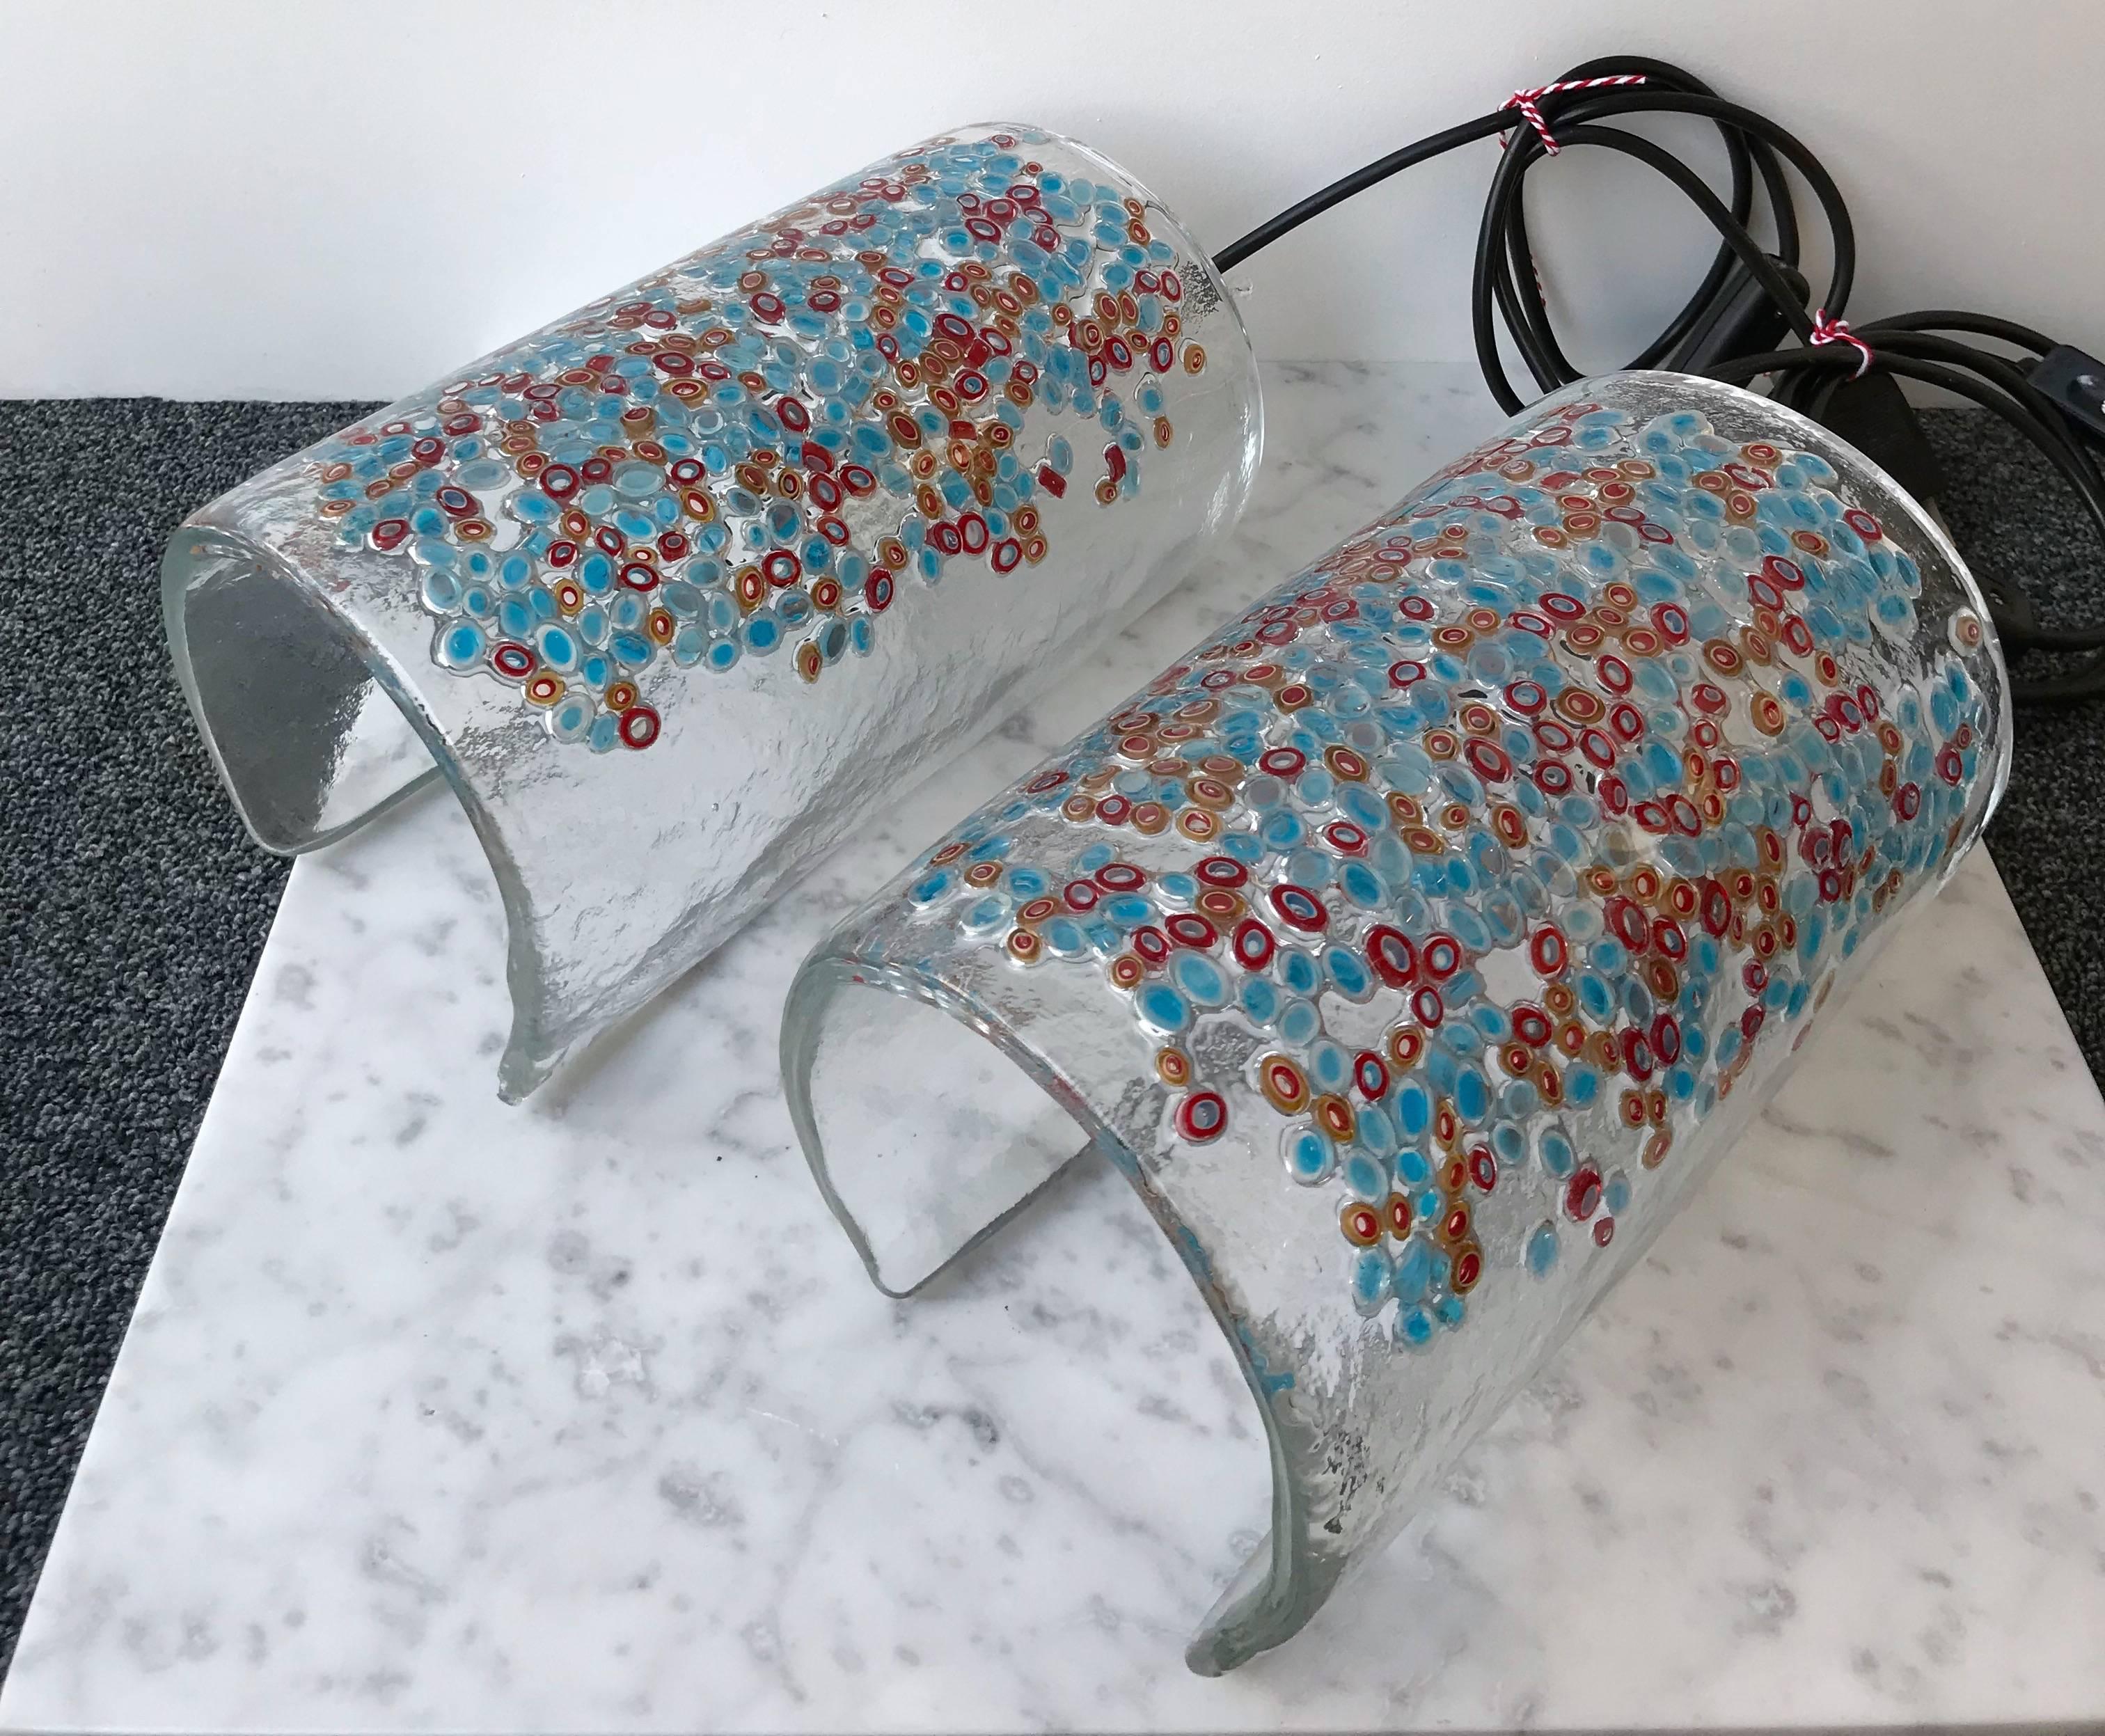 Pair of table or bedside lamps by the artist glassmaker Barbini at Murano. very particular glass. Sign on the glass, original stamp. Two position, horizontal or vertical. Famous manufacture like Mazzega, Venini, Vistosi, Carlo Aldo Nason, Toni